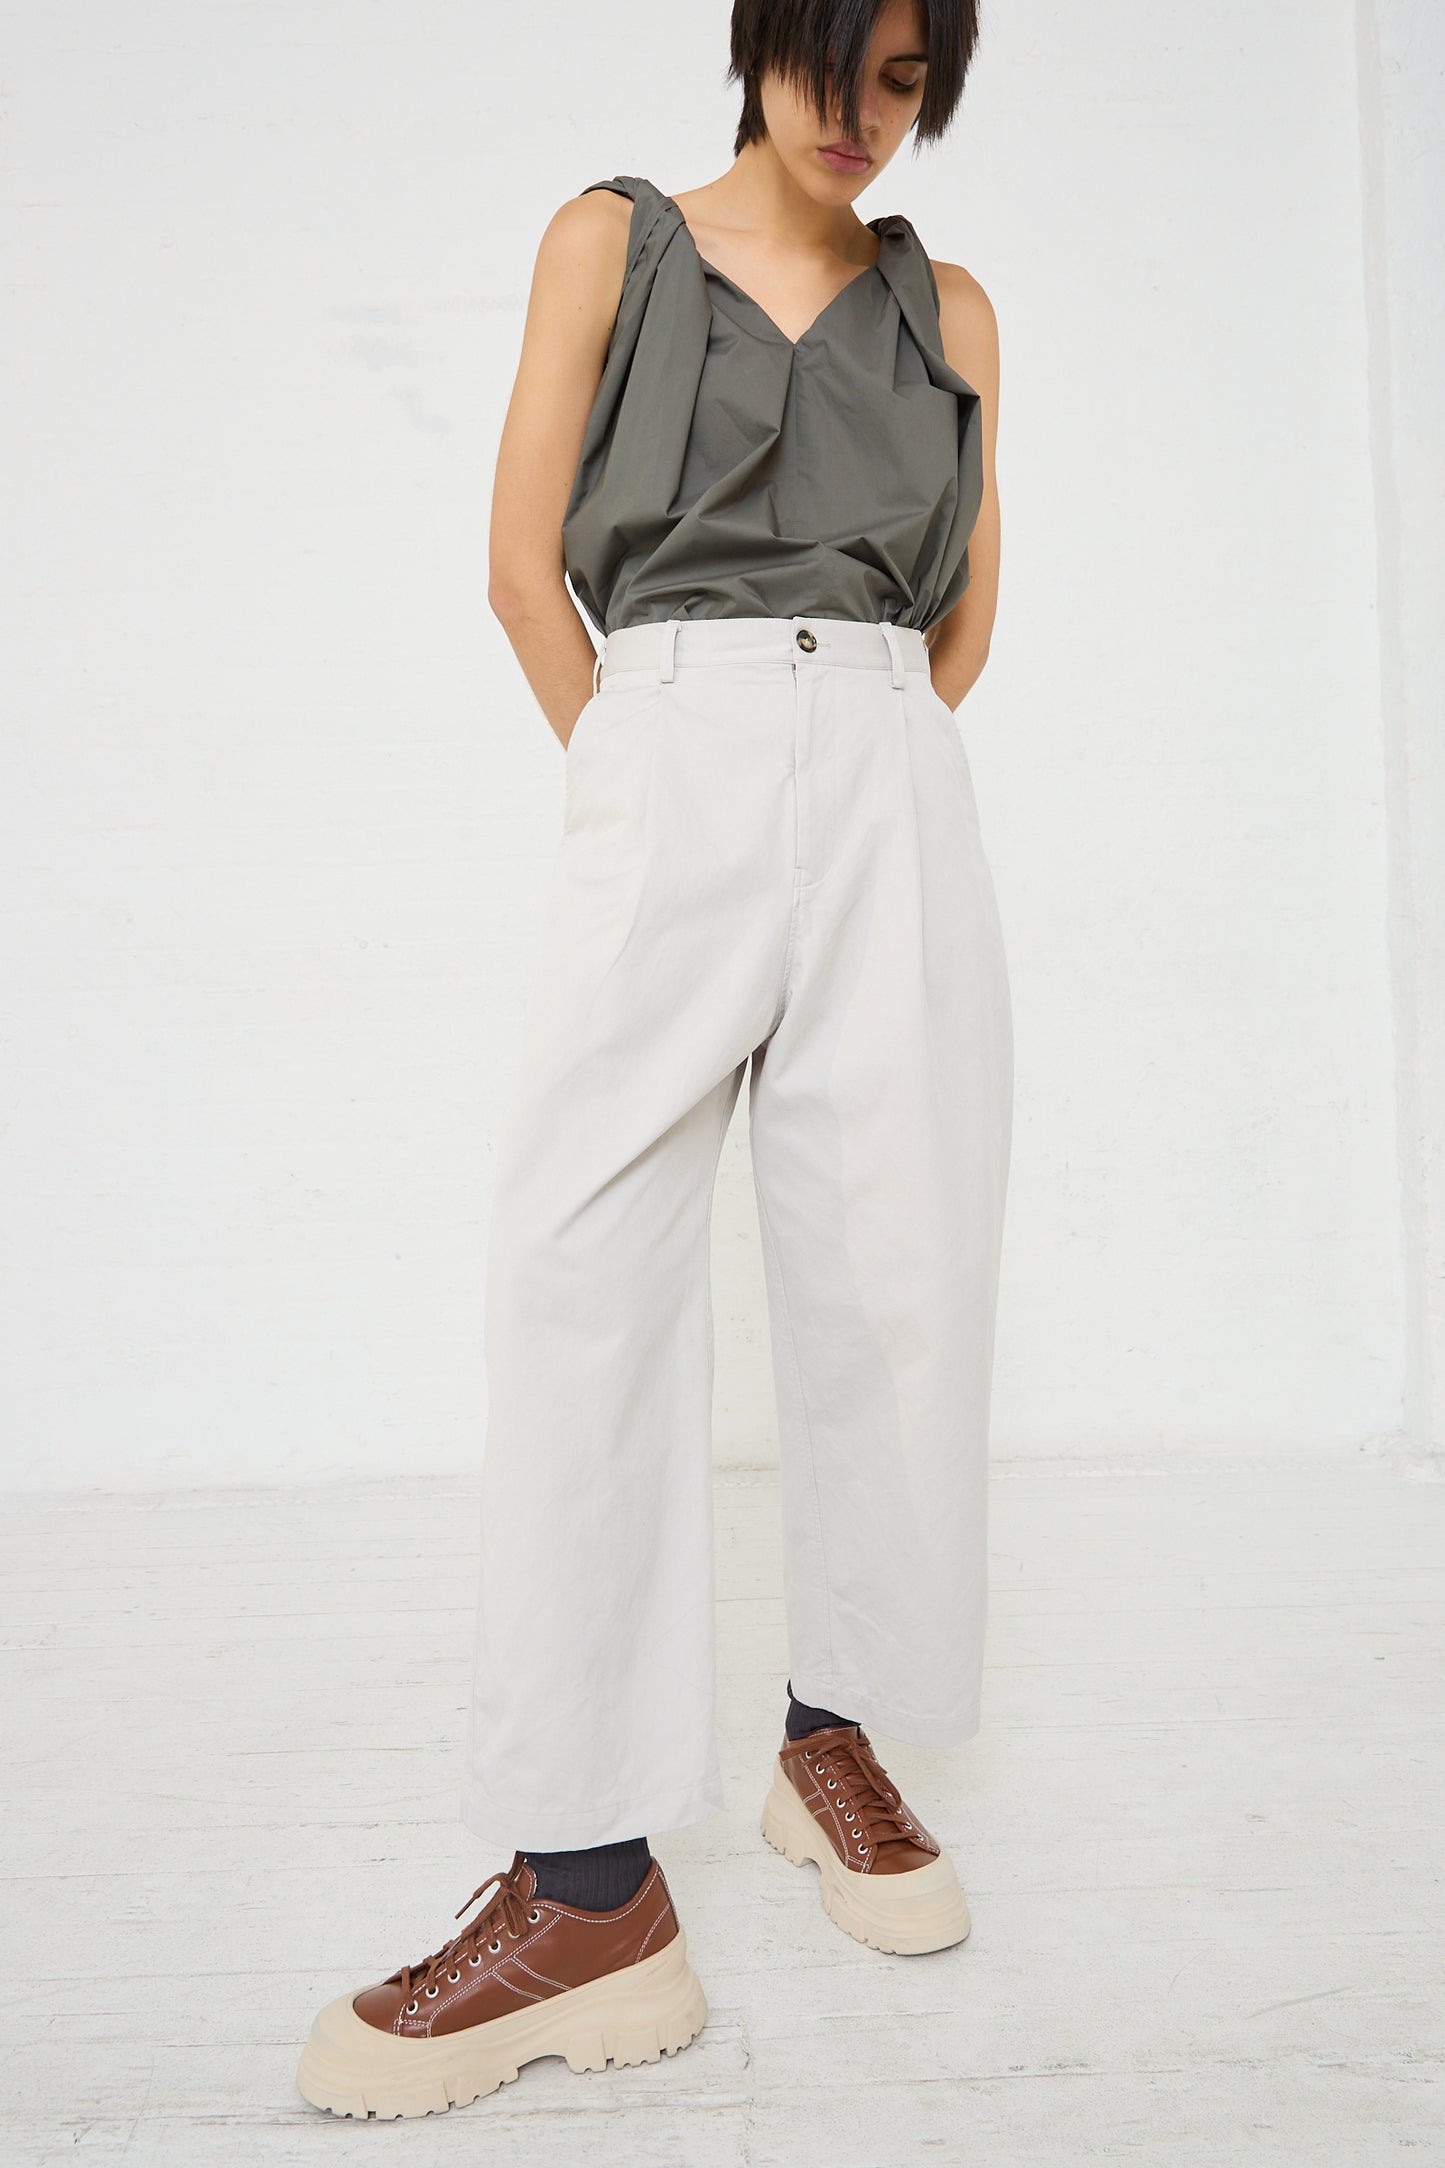 A woman is standing in a white room wearing Sofie D'Hoore's light stone grey Cotton Twill Proof Pant in Mastic with pleat detail.